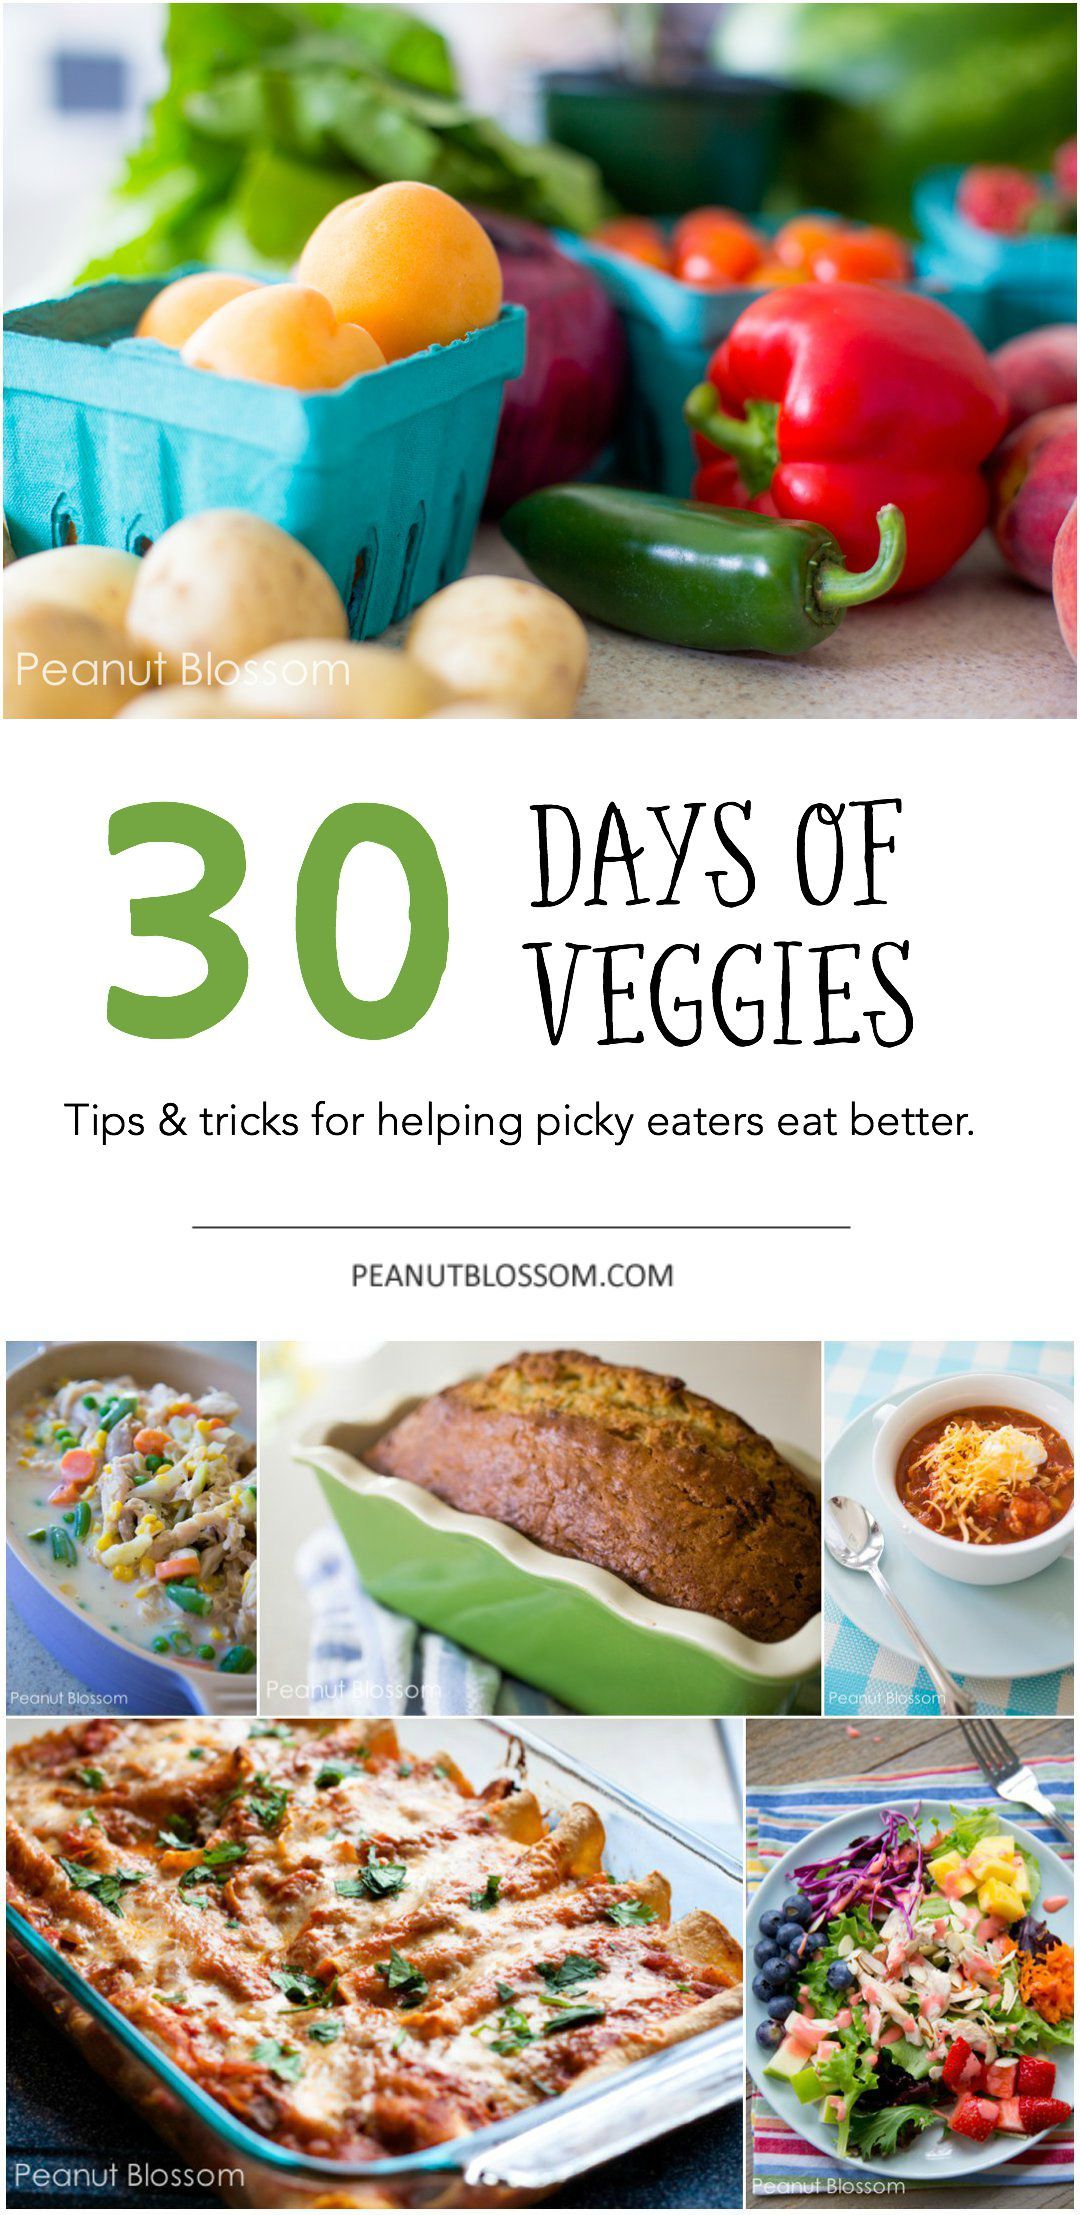 30 Days of Veggies: helping picky eaters eat better -   22 vegetable recipes for picky eaters
 ideas